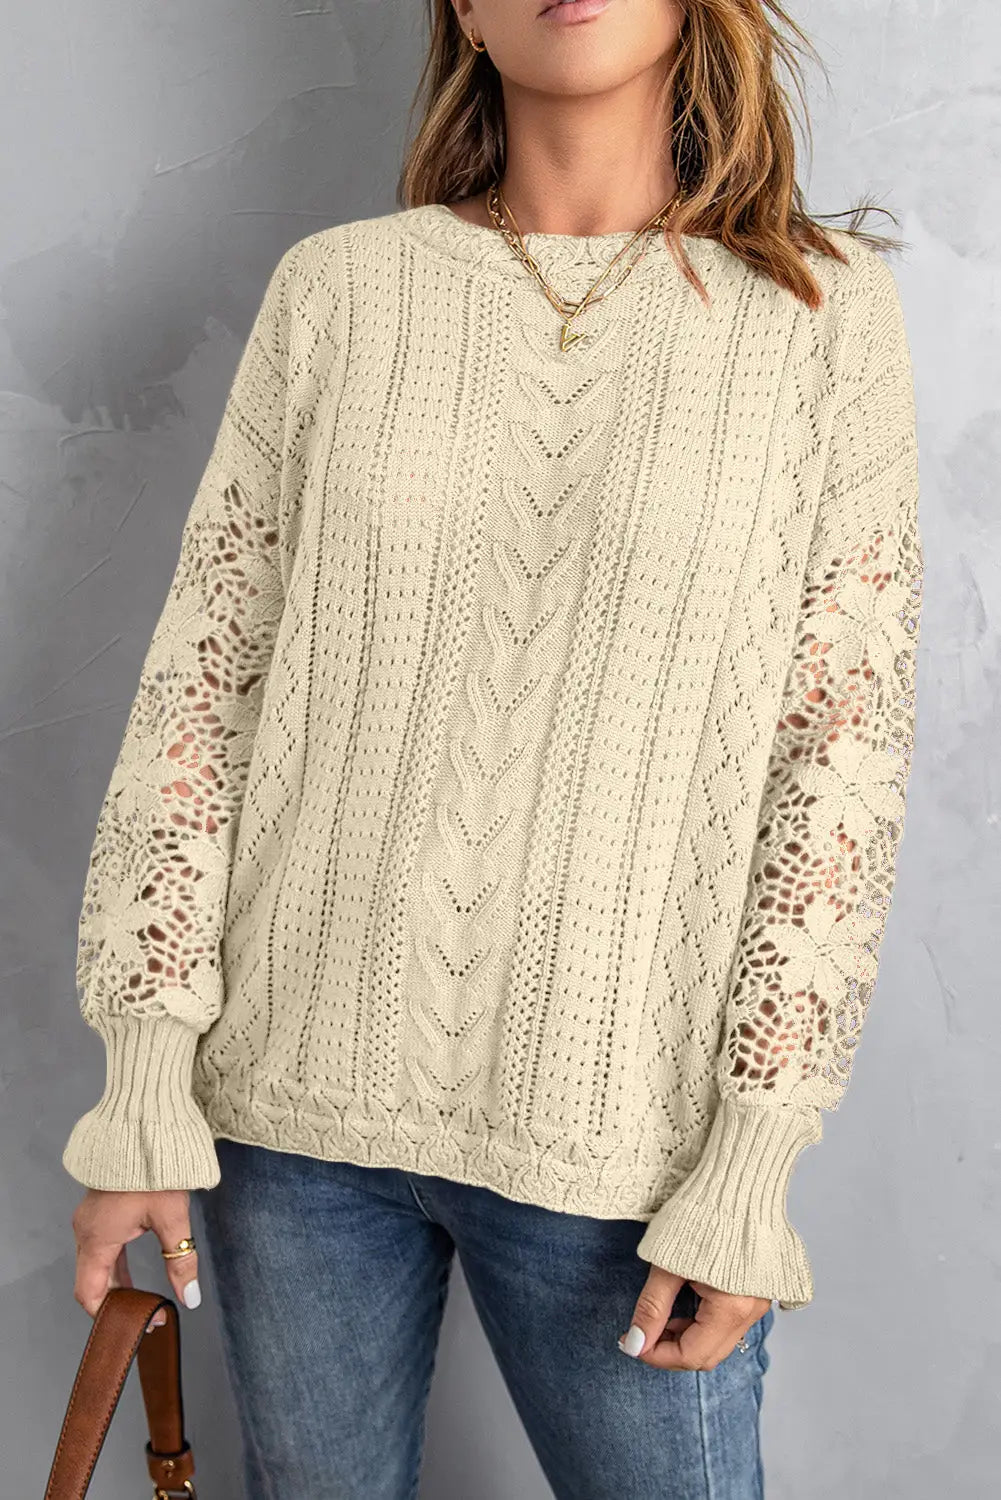 Blue crochet lace pointelle knit sweater - apricot / s / 55% acrylic + 45% cotton - sweaters & cardigans